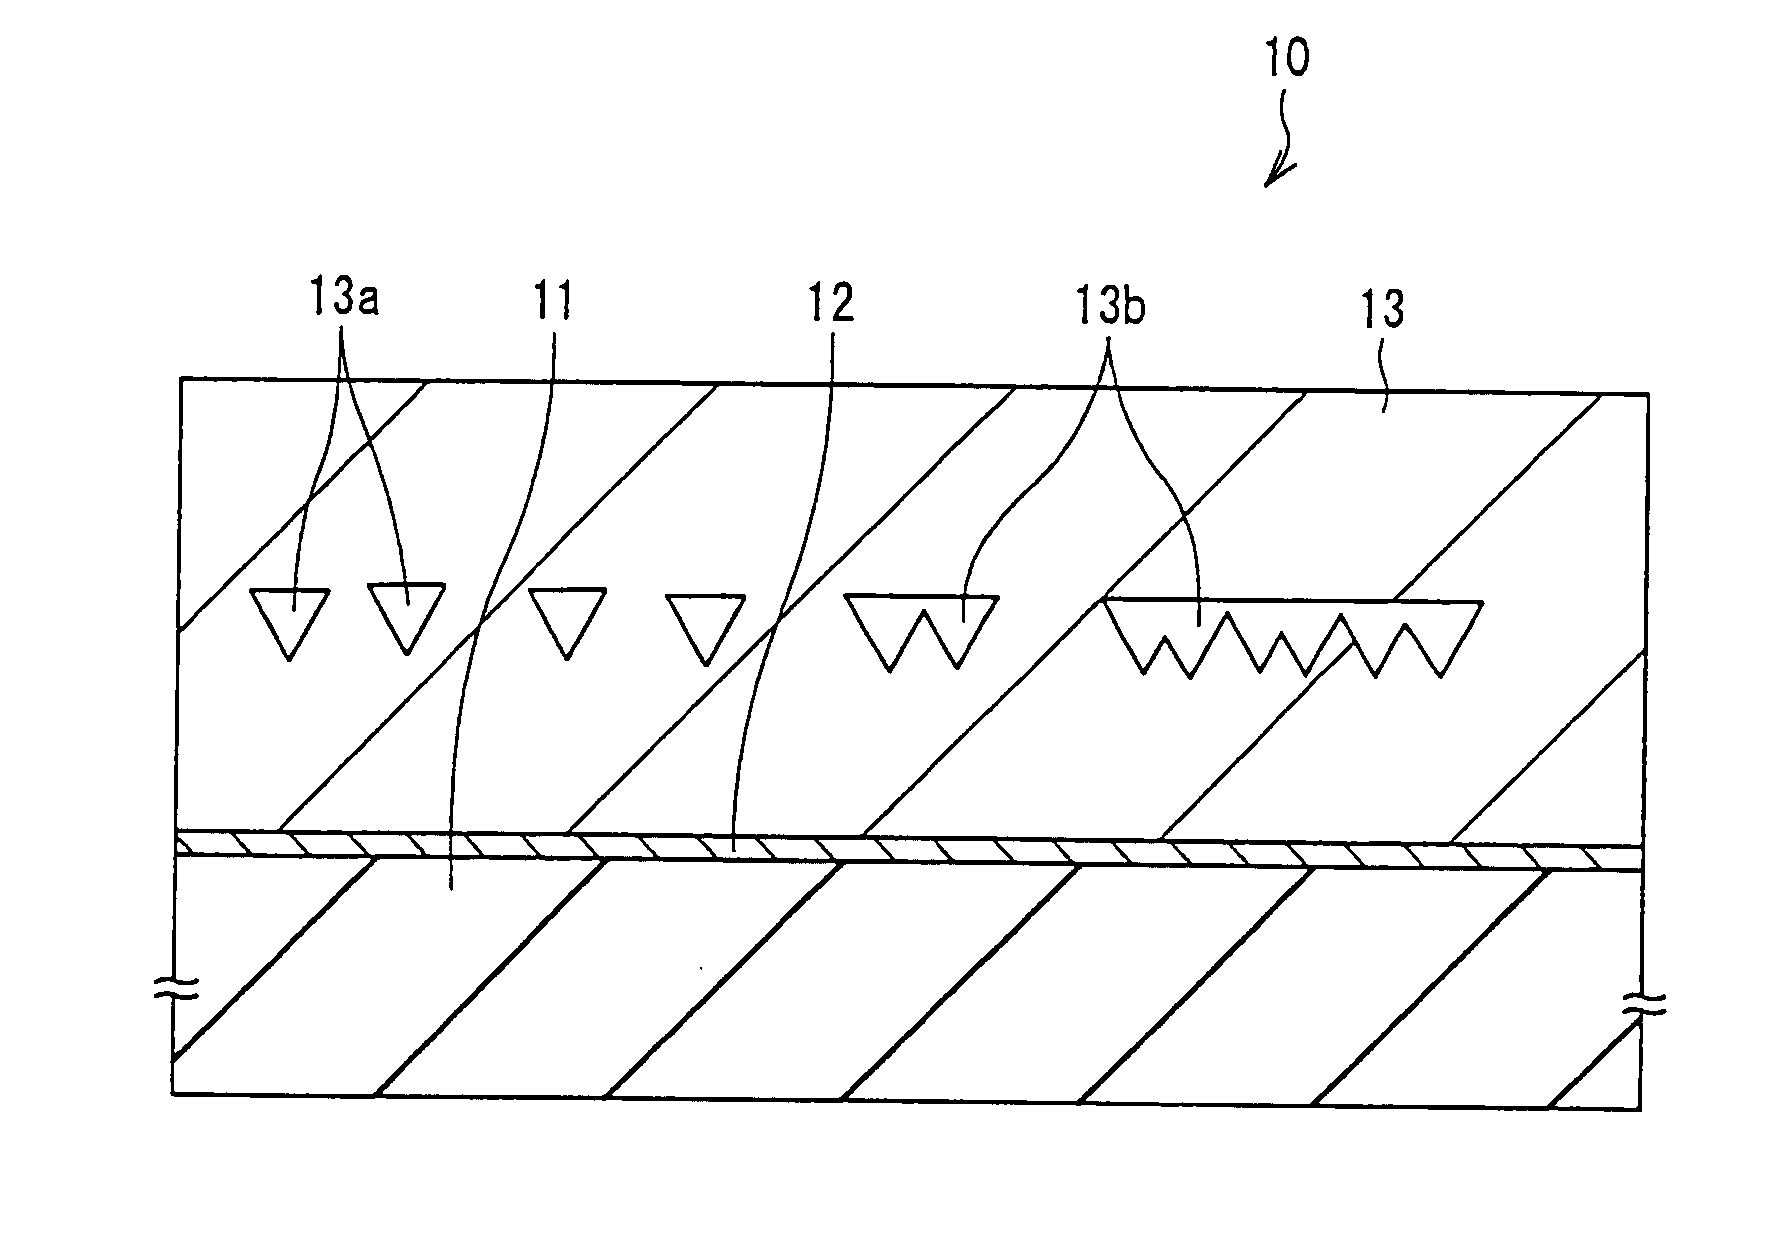 Crystal film, crystal substrate, and semiconductor device